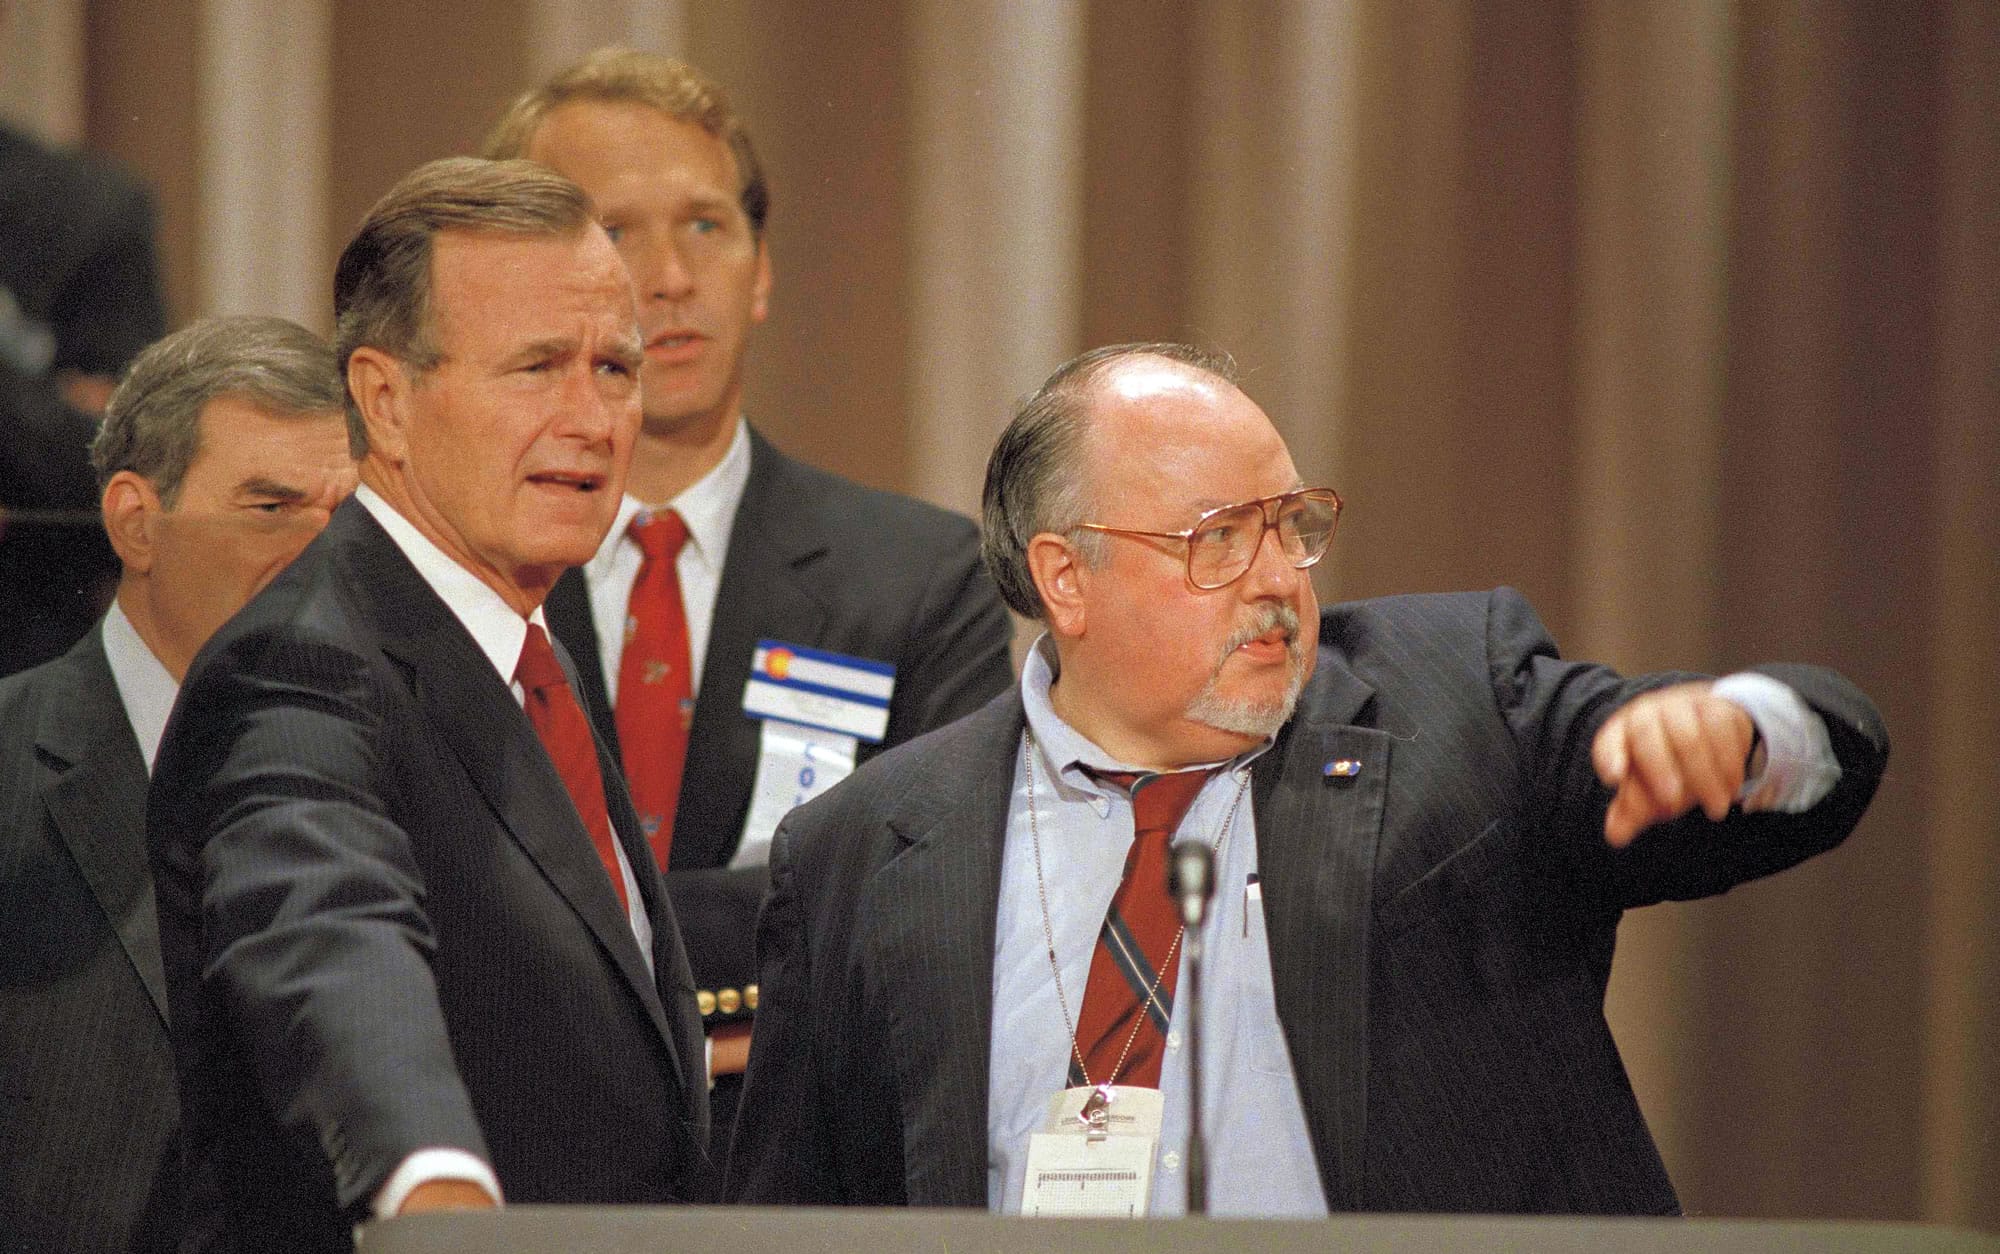 FILE - In this Aug. 17, 1988 file photo, Vice President George H.W. Bush, left, gets some advice from his media advisor, Roger Ailes, right, as they stand behind the podium at the Superdome in New Orleans, La., prior to the start of the Republican National Convention.  Fox News said on Thursday, May 18, 2017, that Ailes has died. He was 77.